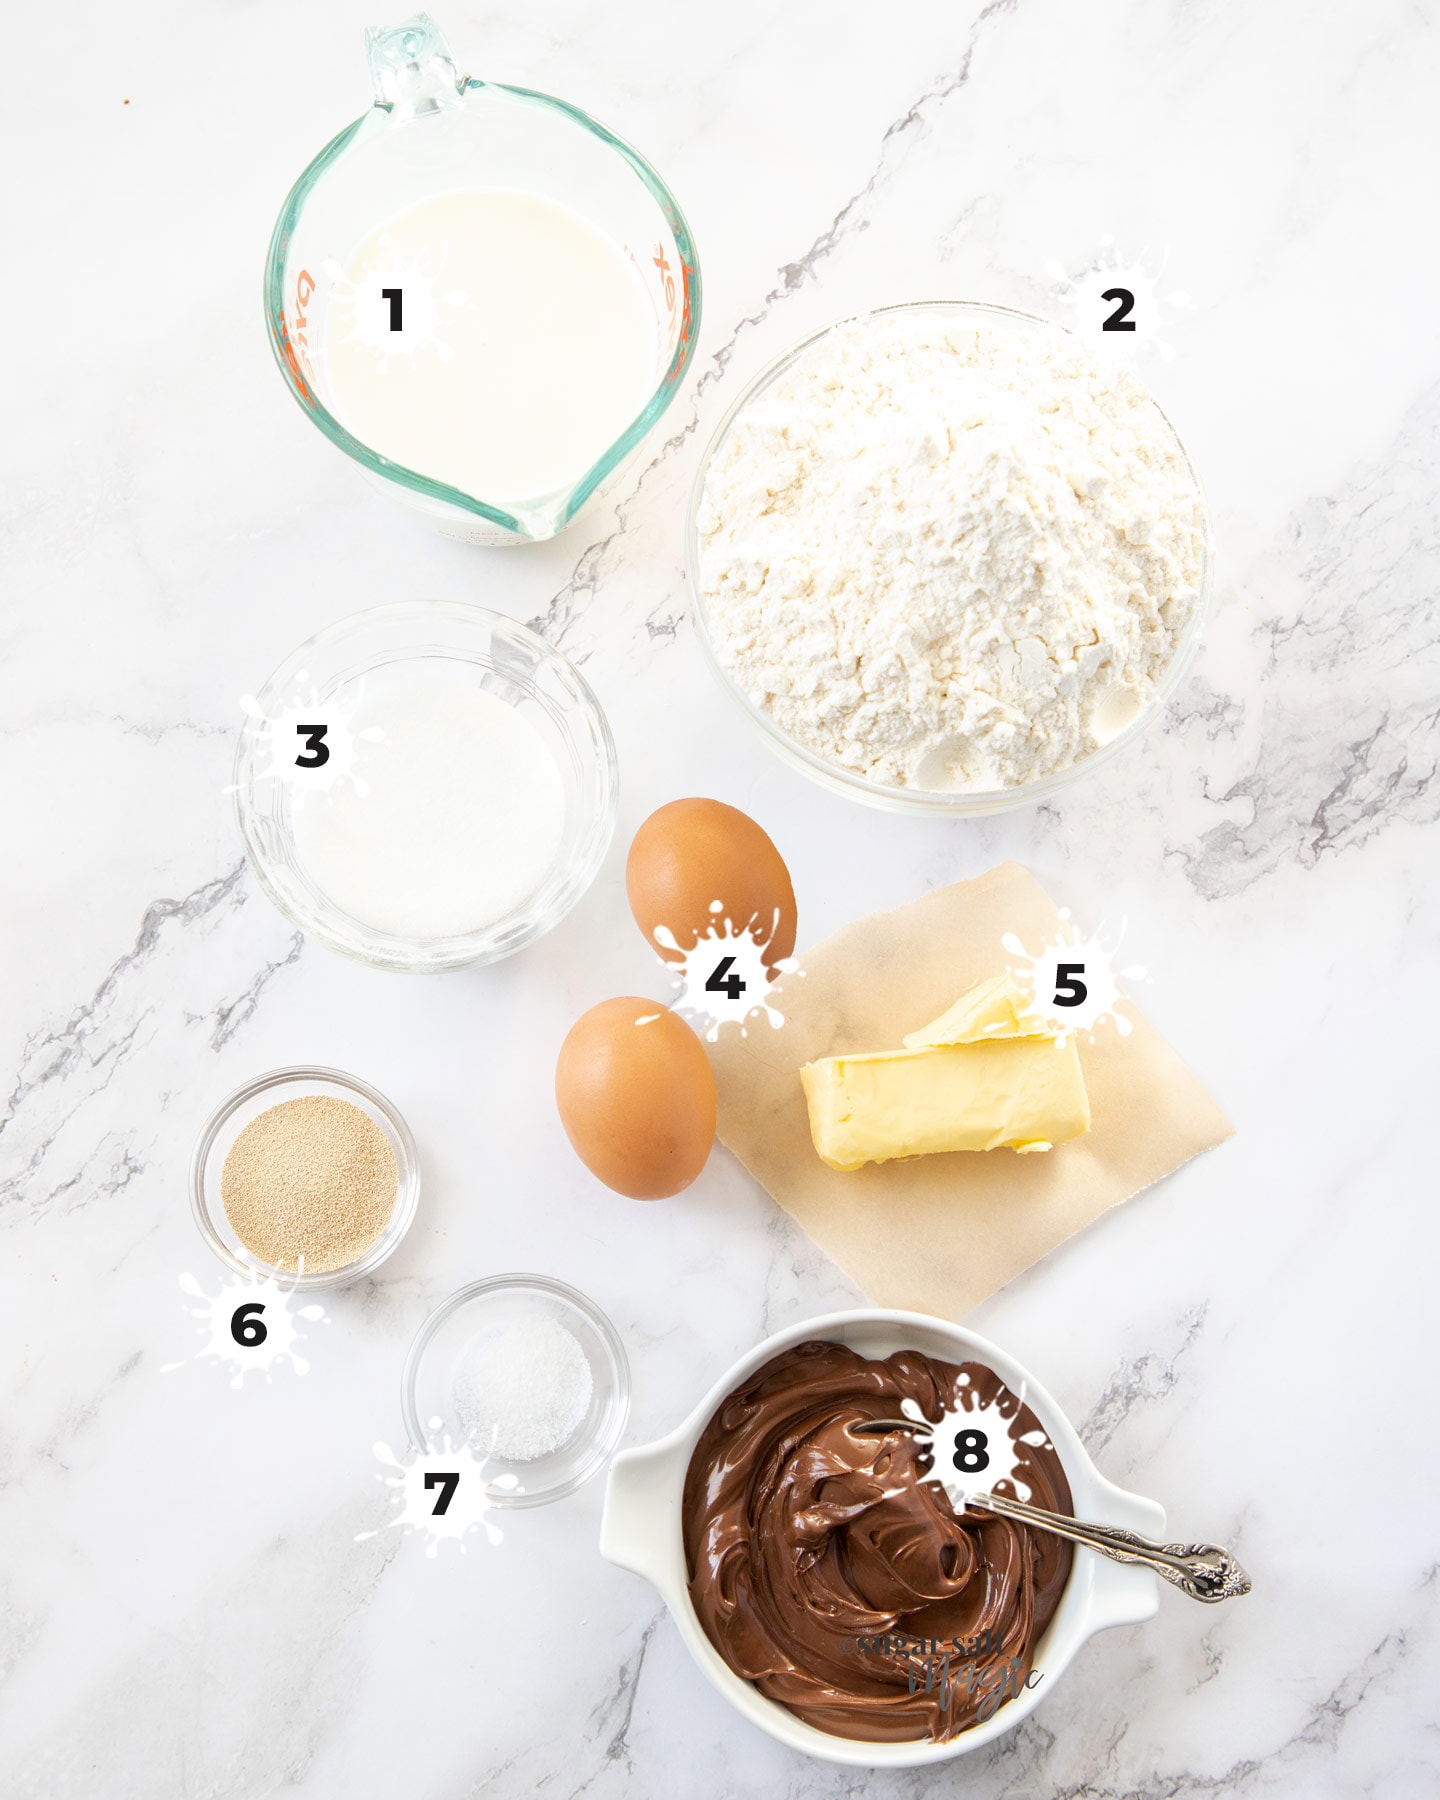 Ingredients for nutella star bread